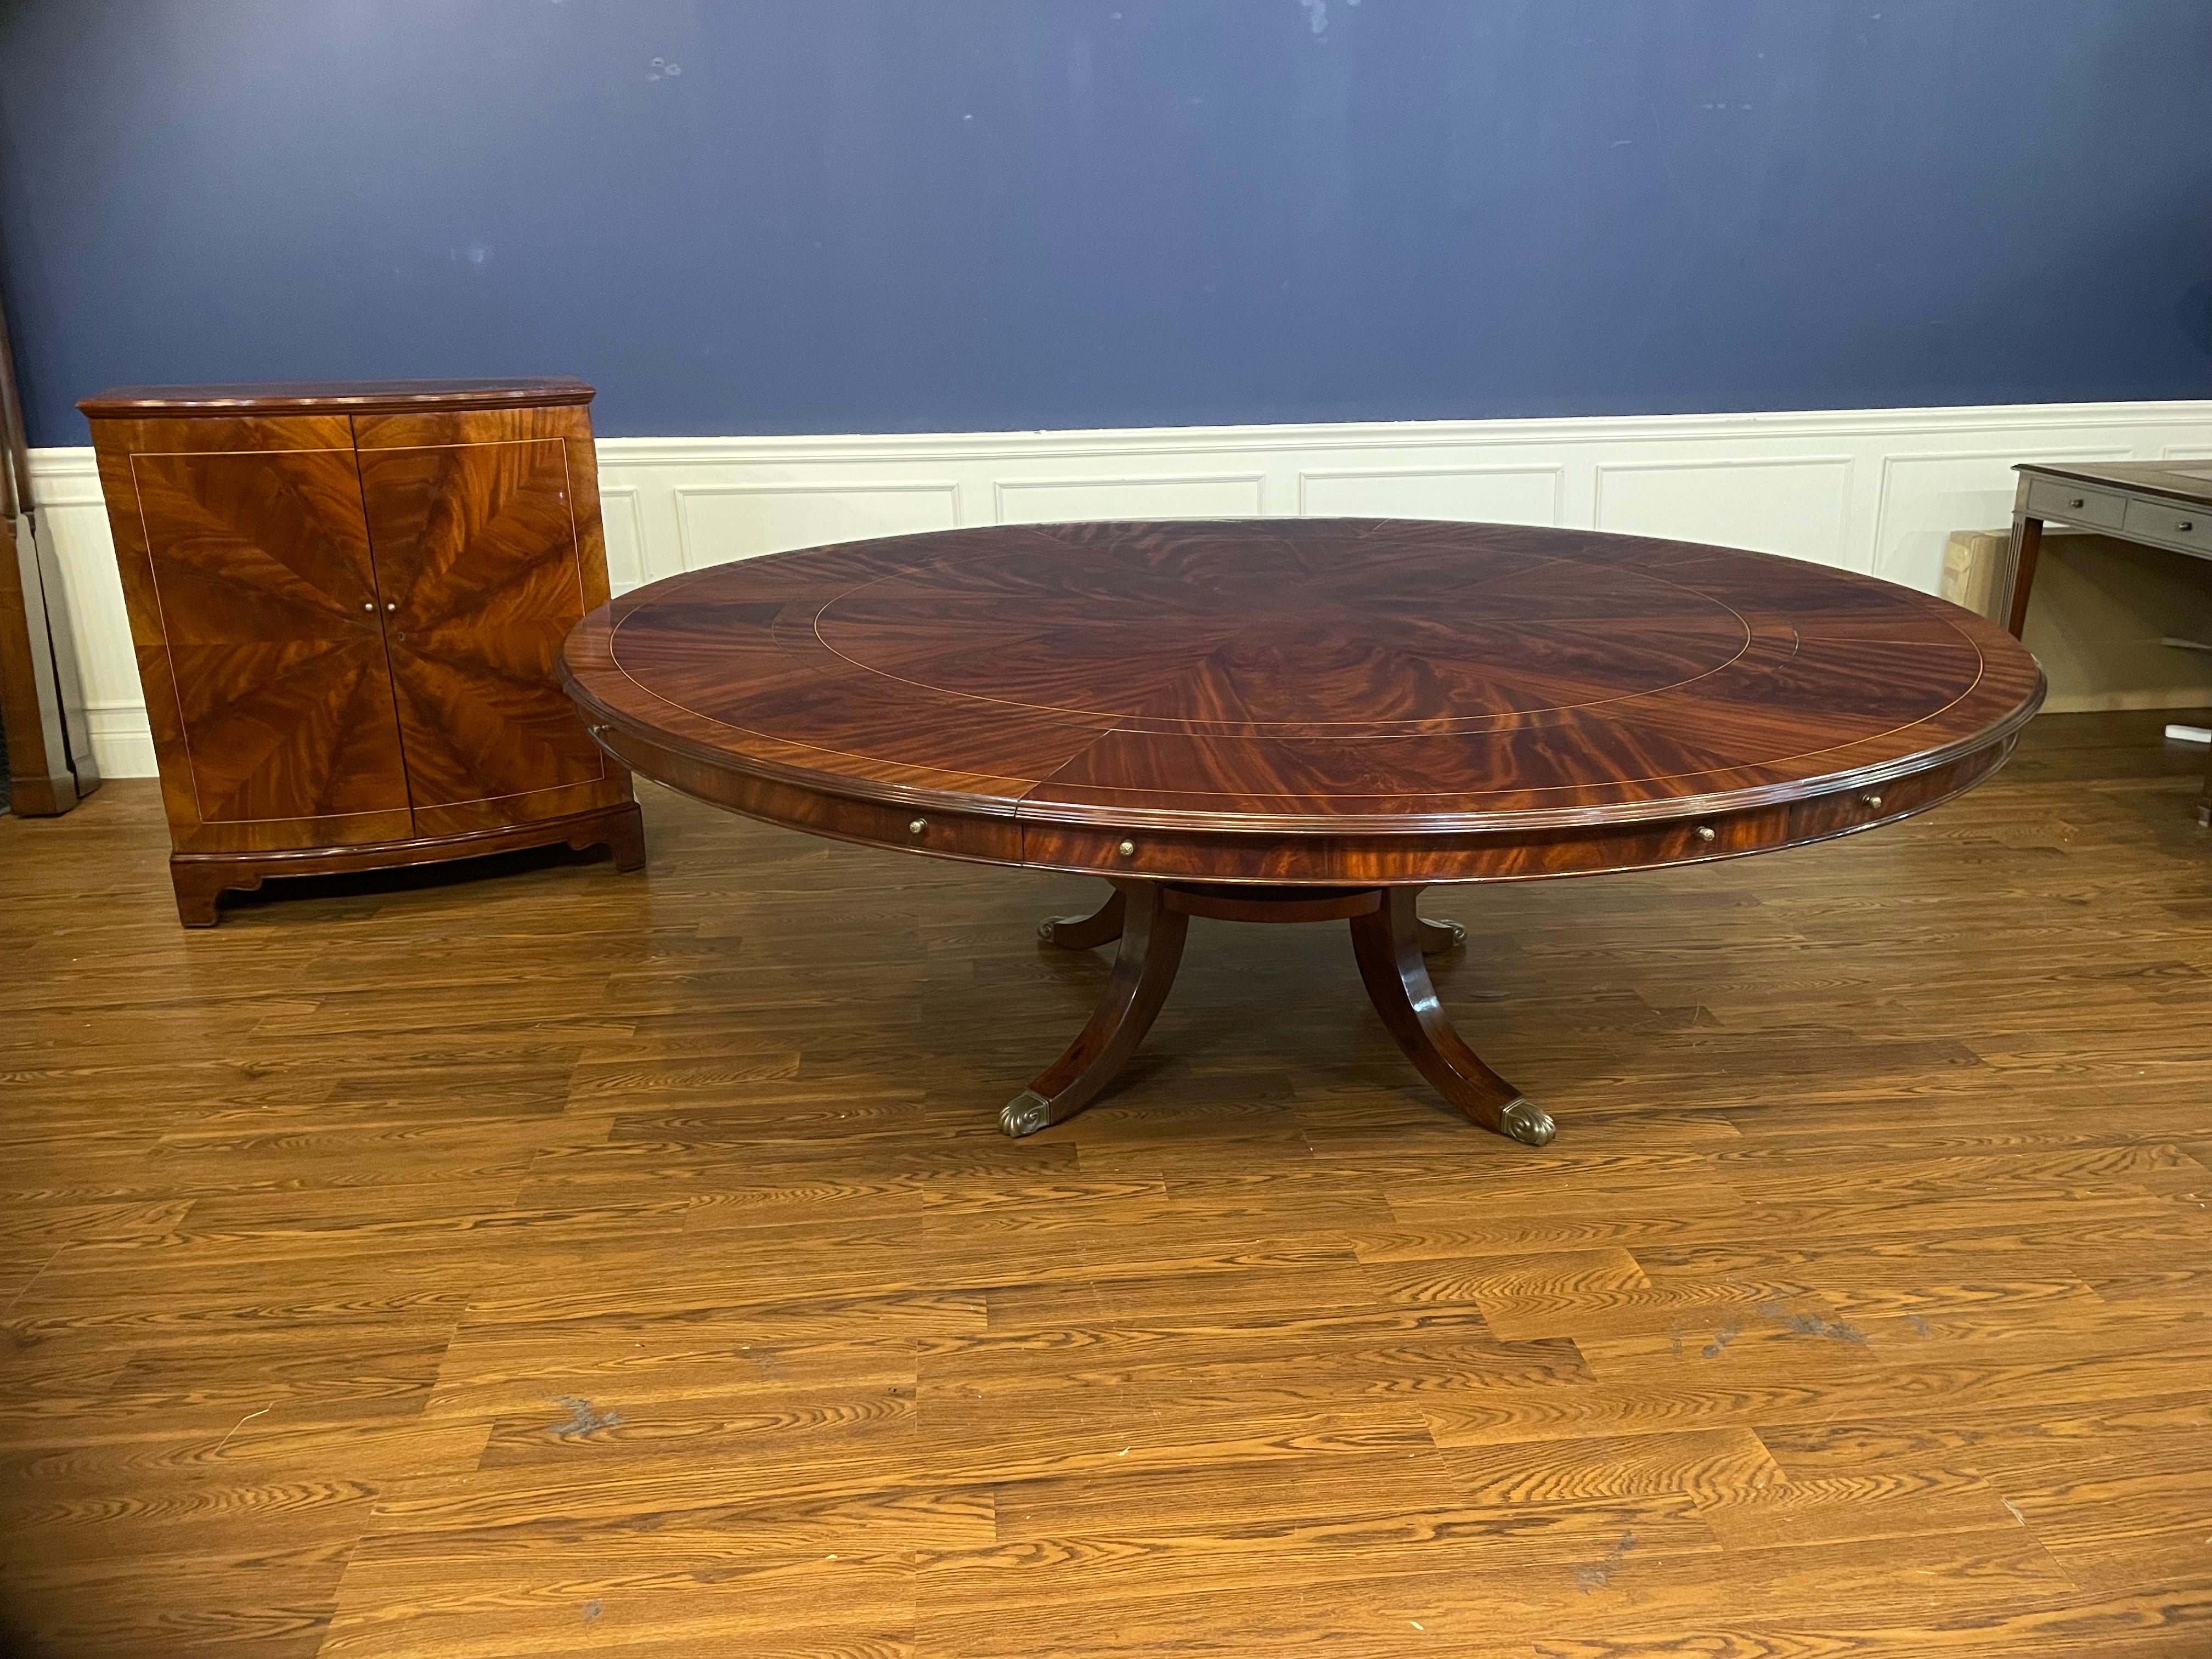 This is a magnificent large round dining/banquet table with a matching leaf storage cabinet.  This is a Leighton Hall prototype table and cabinet (First one we’ve made of this design).  The table features a field of radial cut swirly crotch mahogany